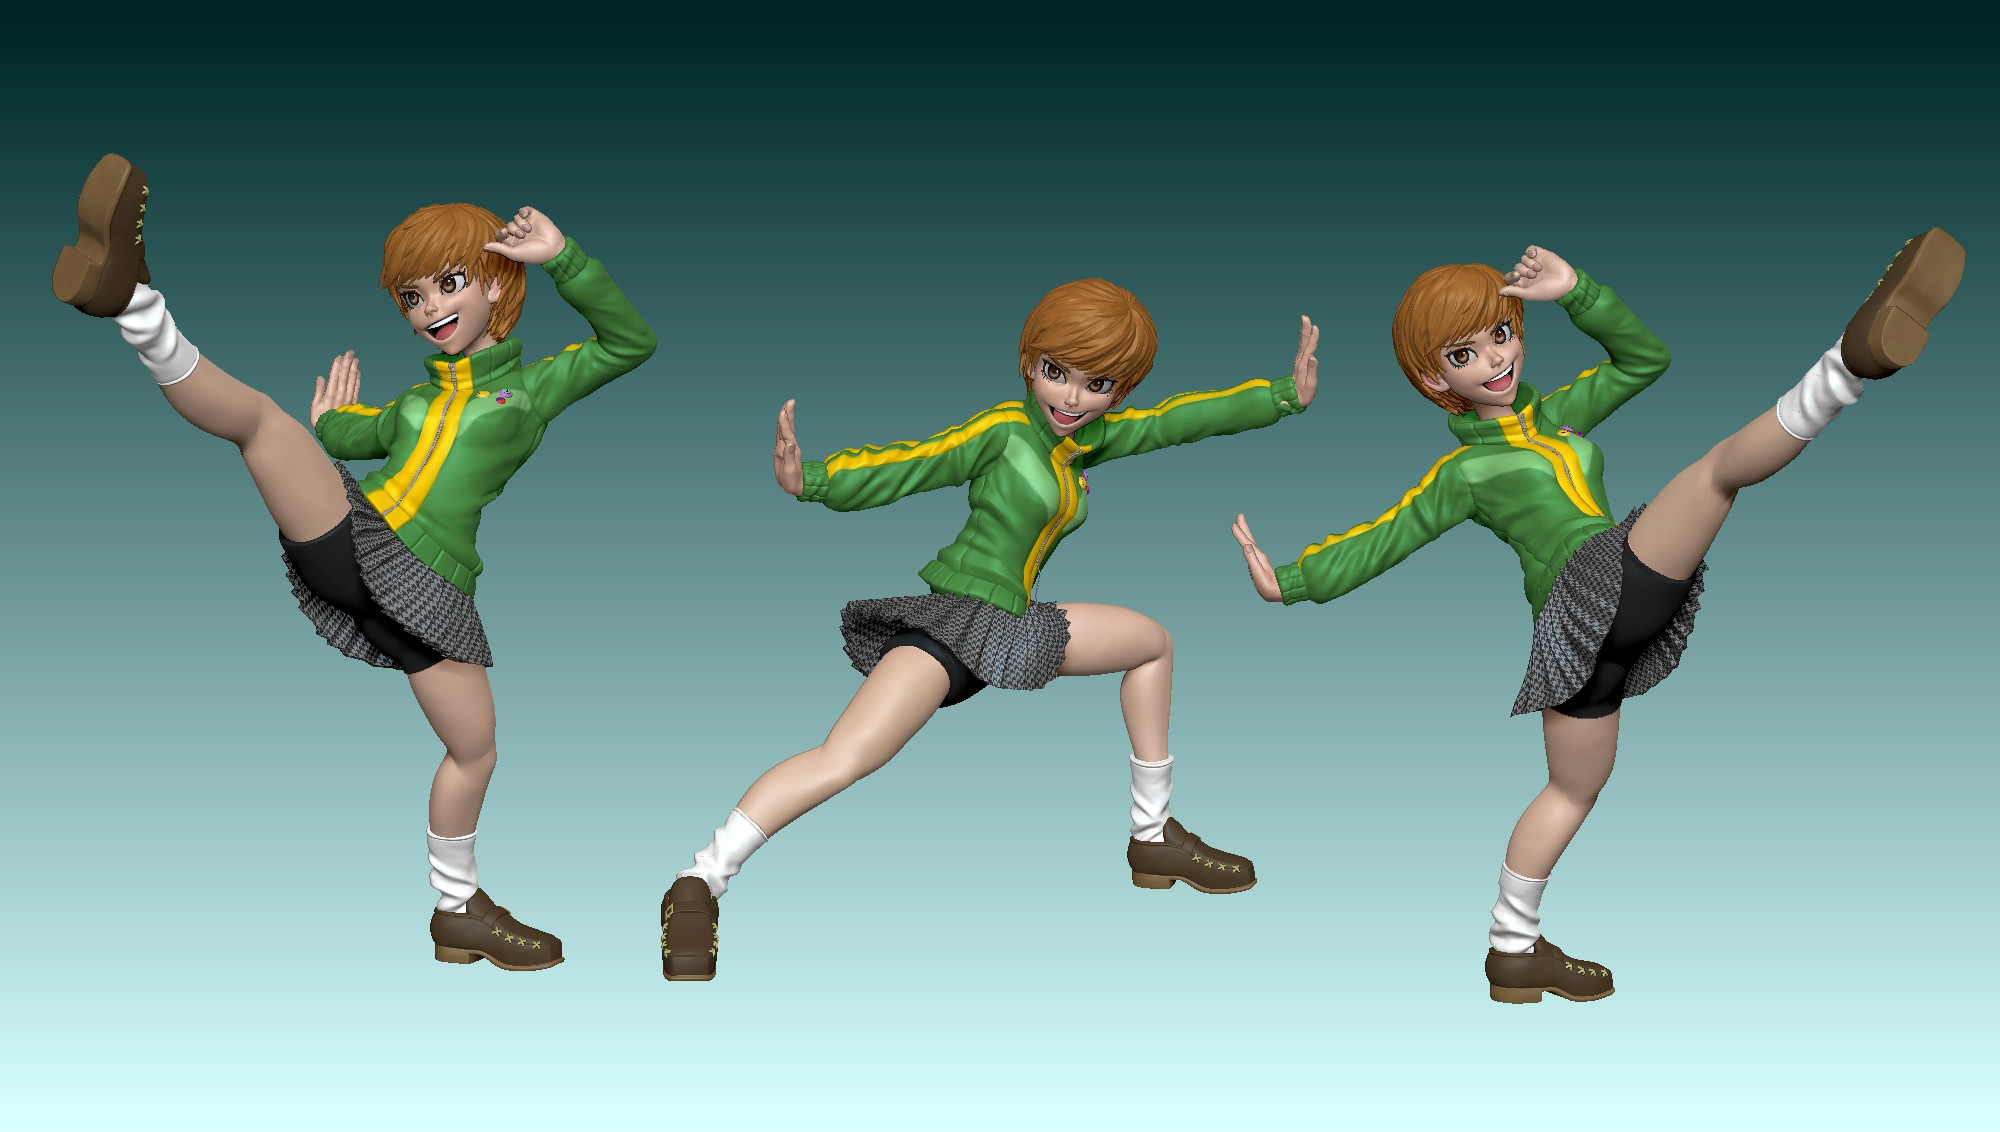 Some of the poses I experimented with. The squat had potential but I really wanted her kicking. It was hard to find a good balance of twisting the torso and still having the kick feel like martial arts rather than dancing.